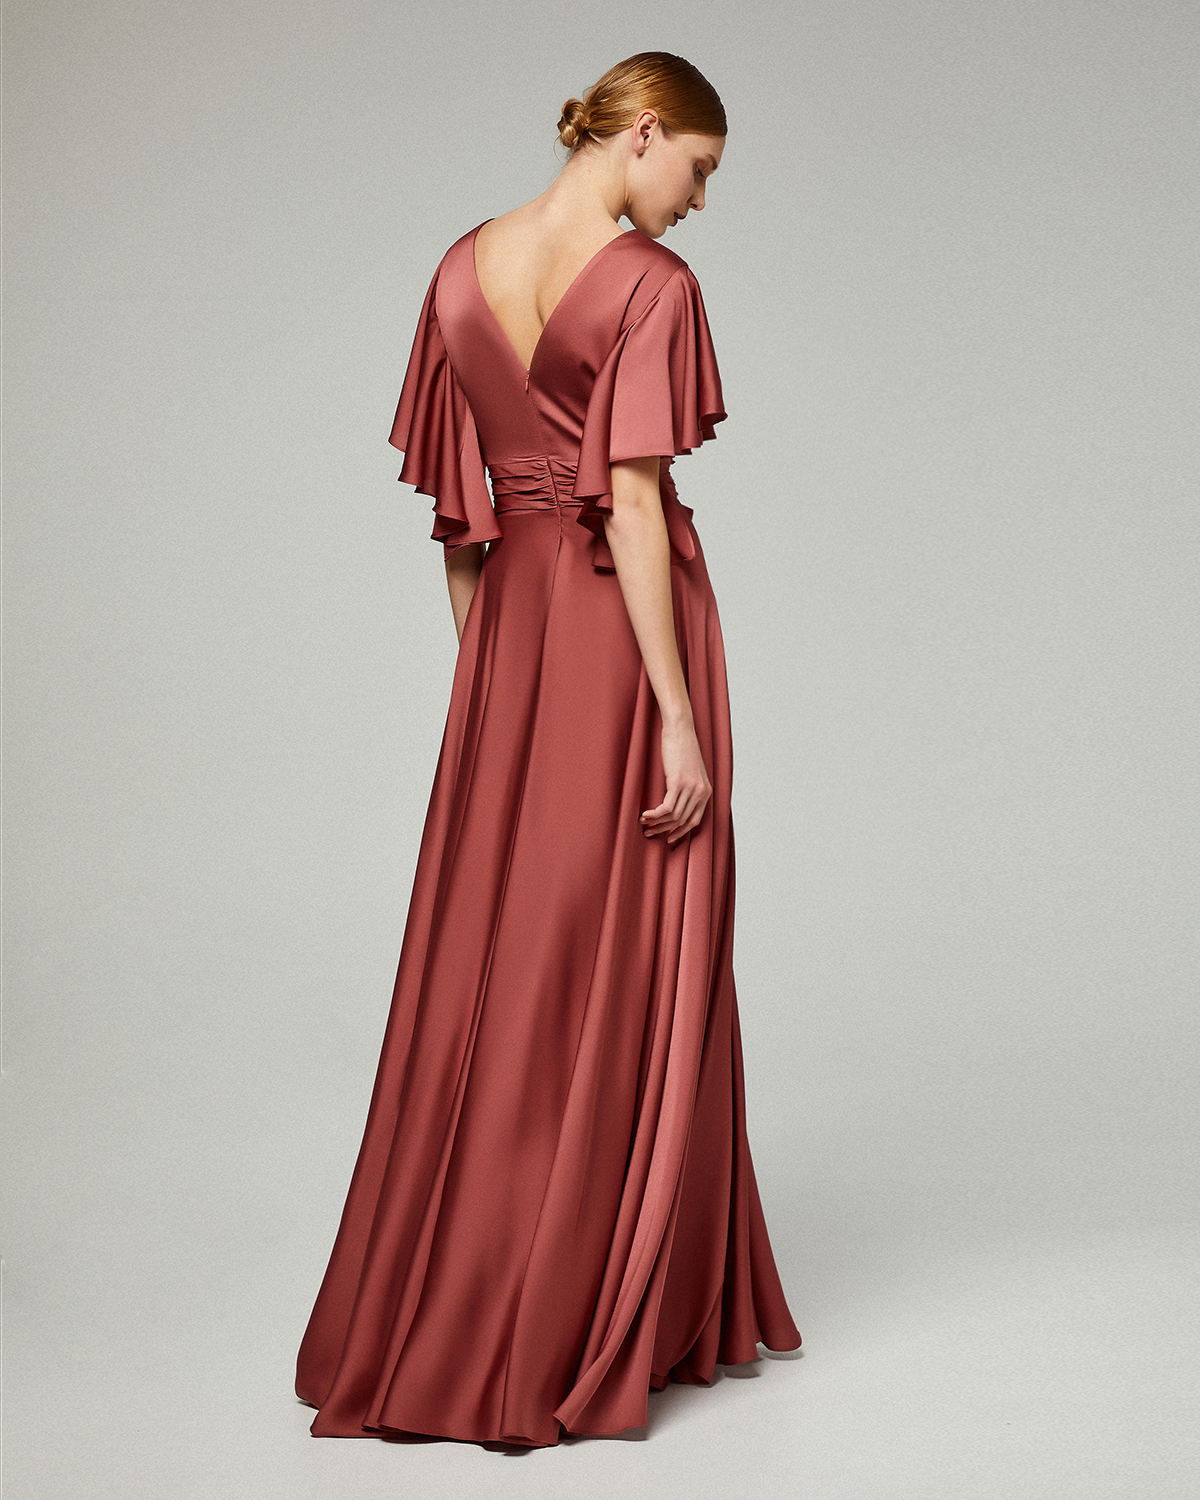 Classic Dresses / Long evening satin dress with short sleeves